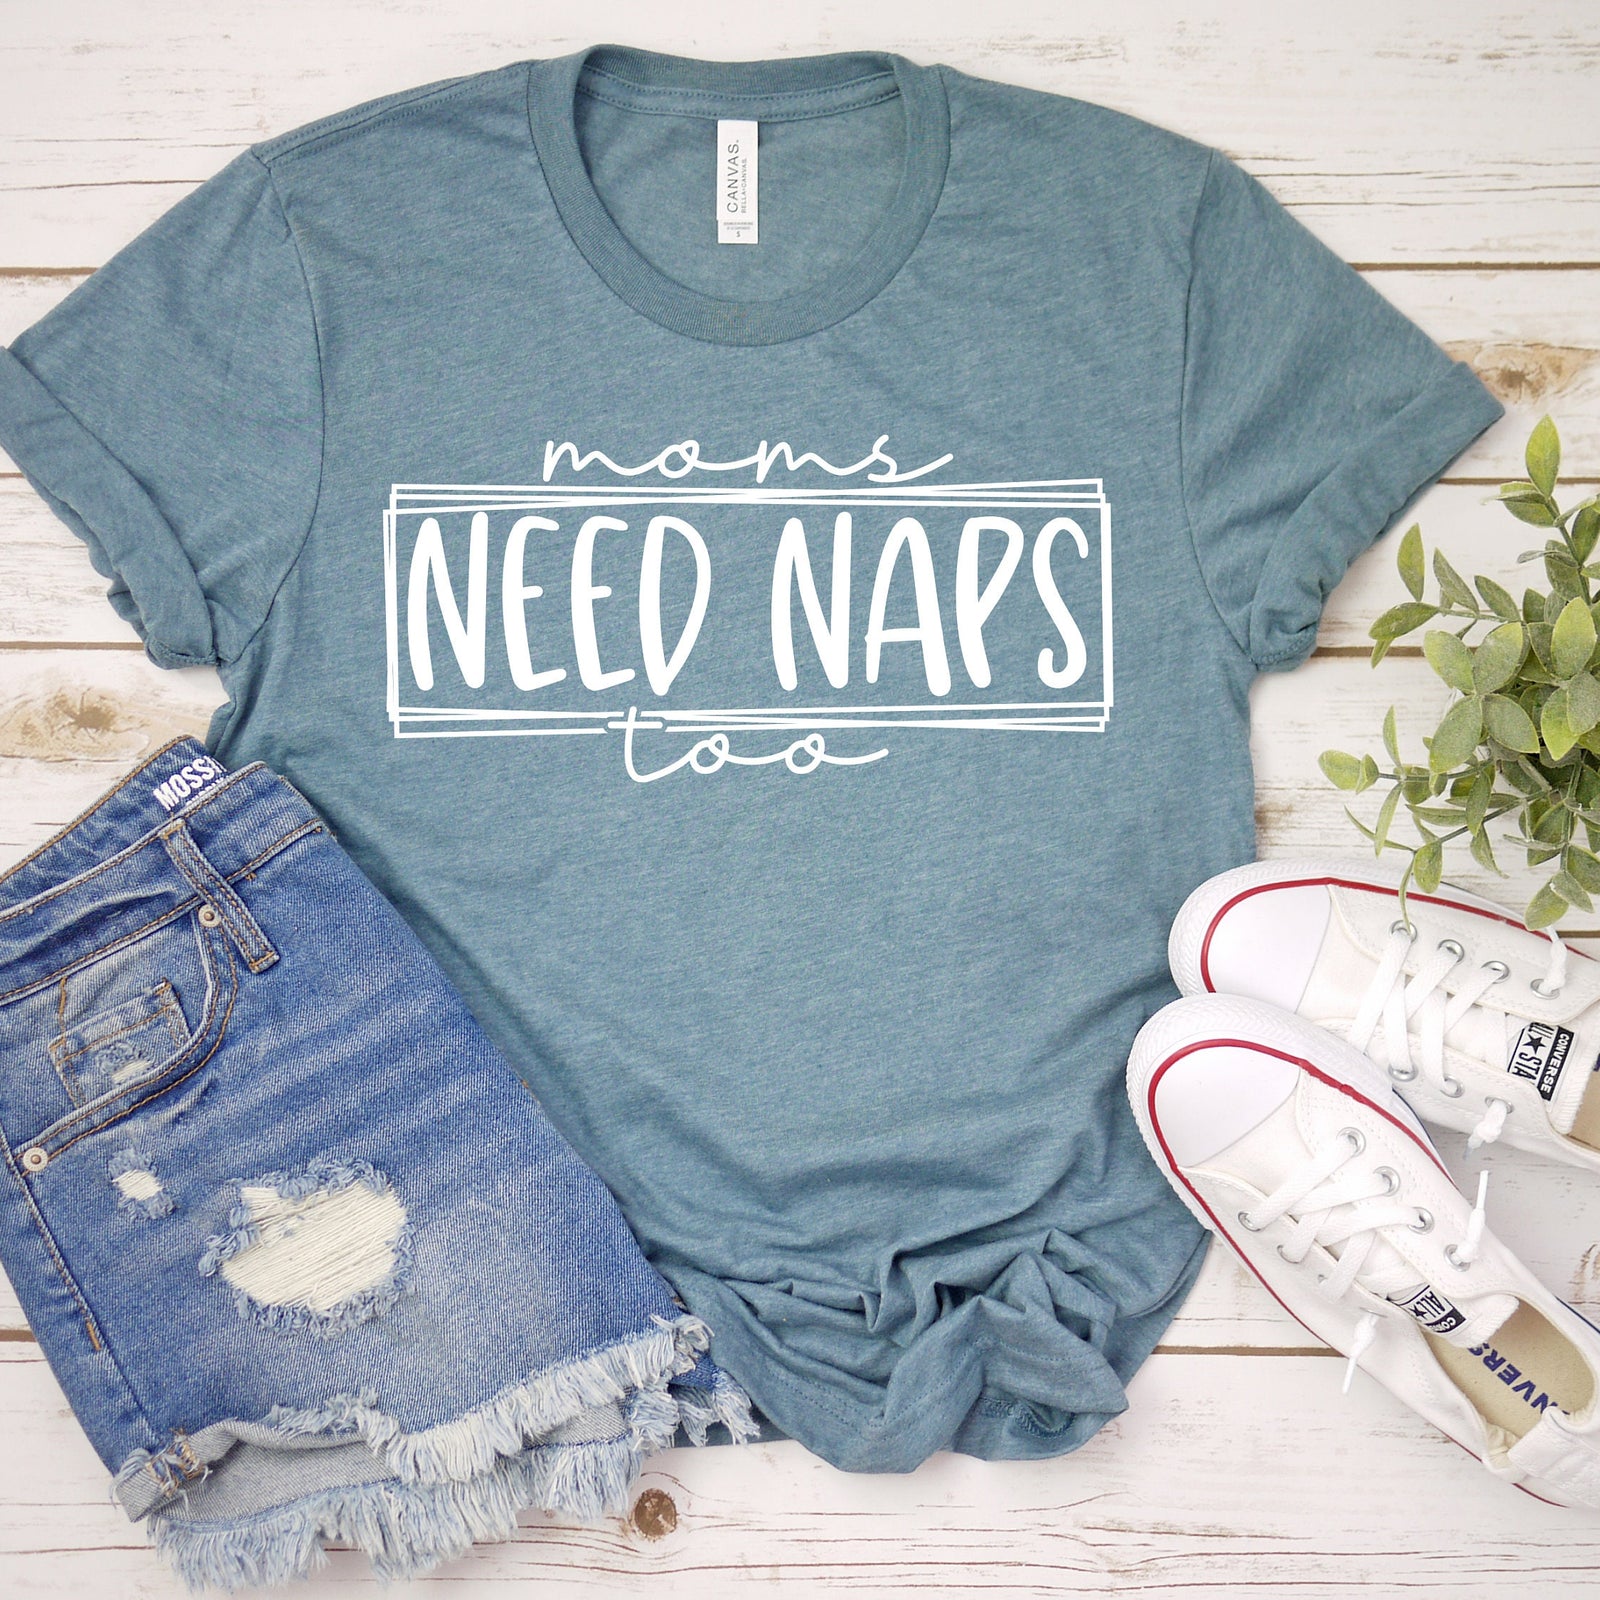 Moms Need Naps Too Adult Unisex T Shirt -Mother's Day Gift Idea  - Mom tee - Funny Mom Shirts